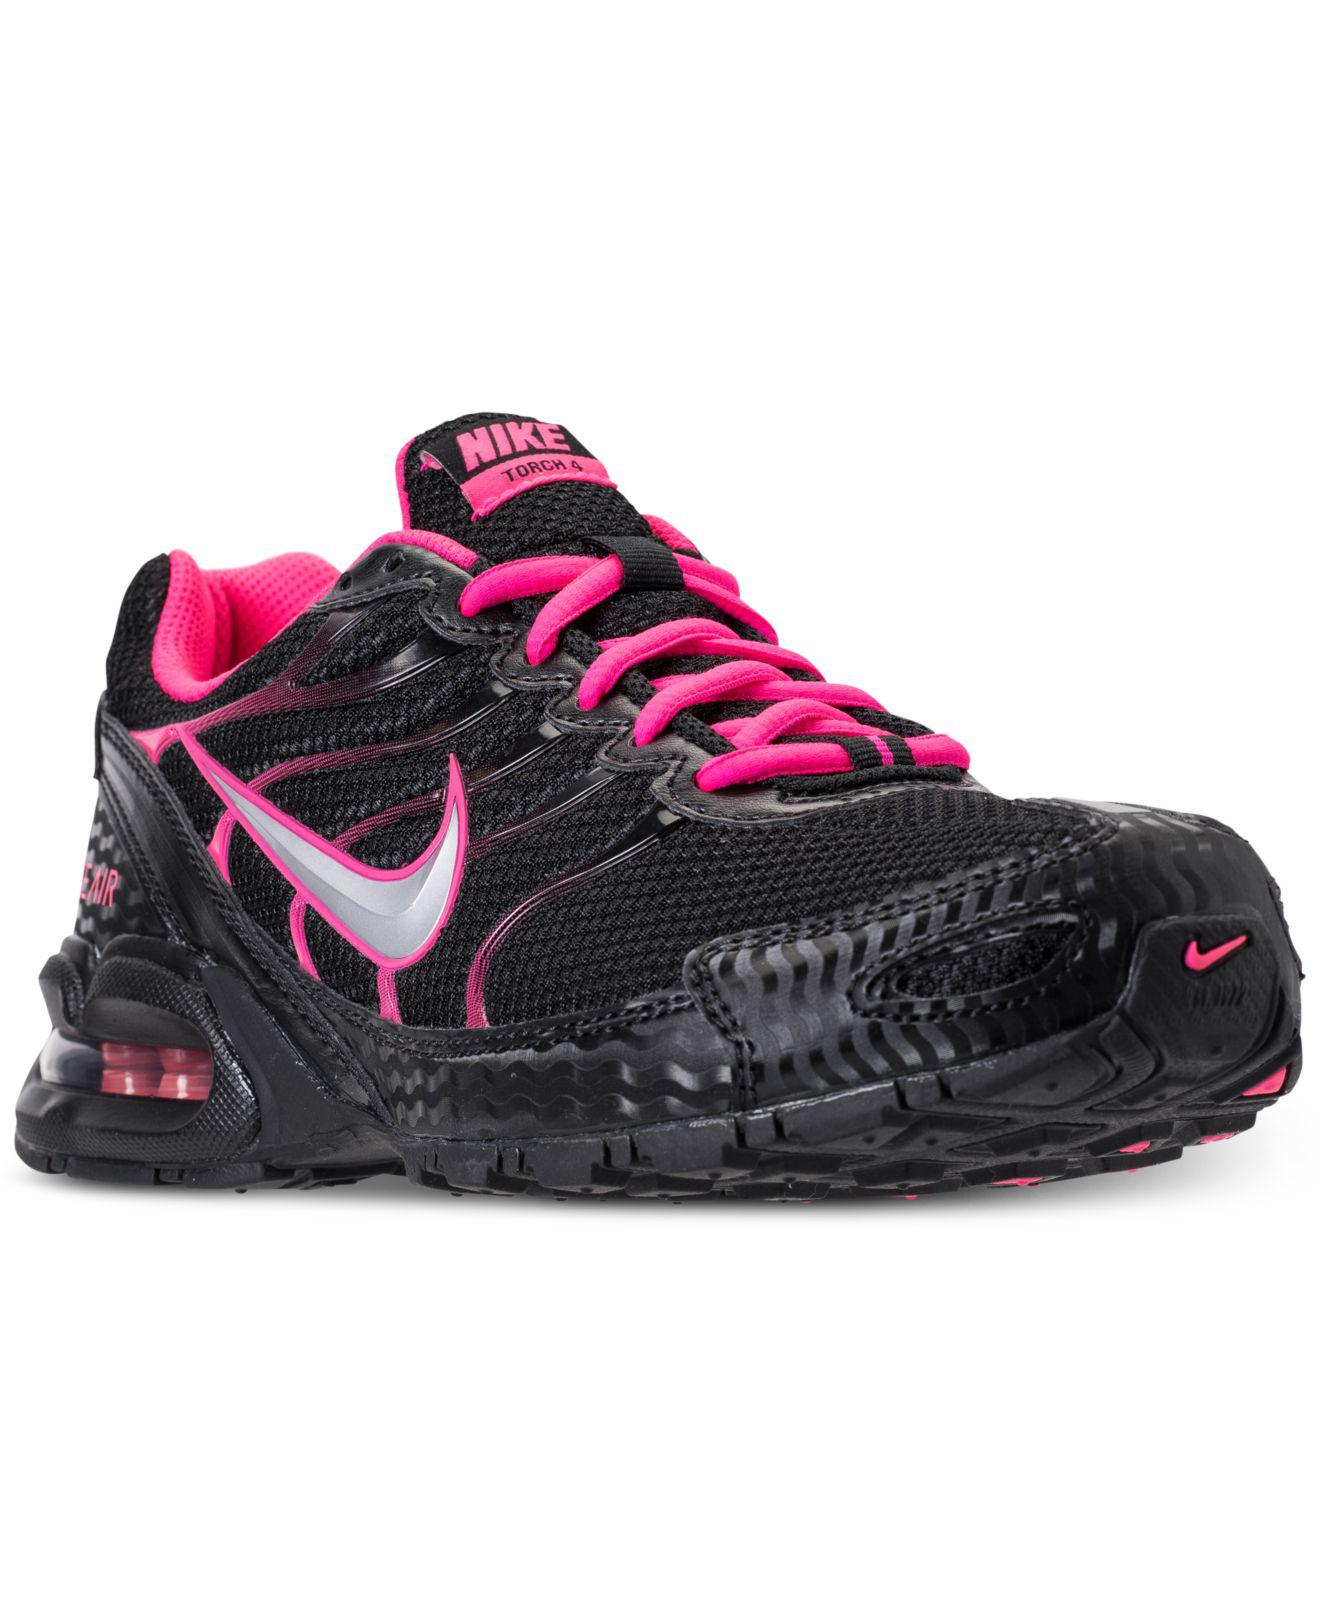 Nike Women's Air Max Torch 4 Running Sneakers From Finish Line in Black |  Lyst